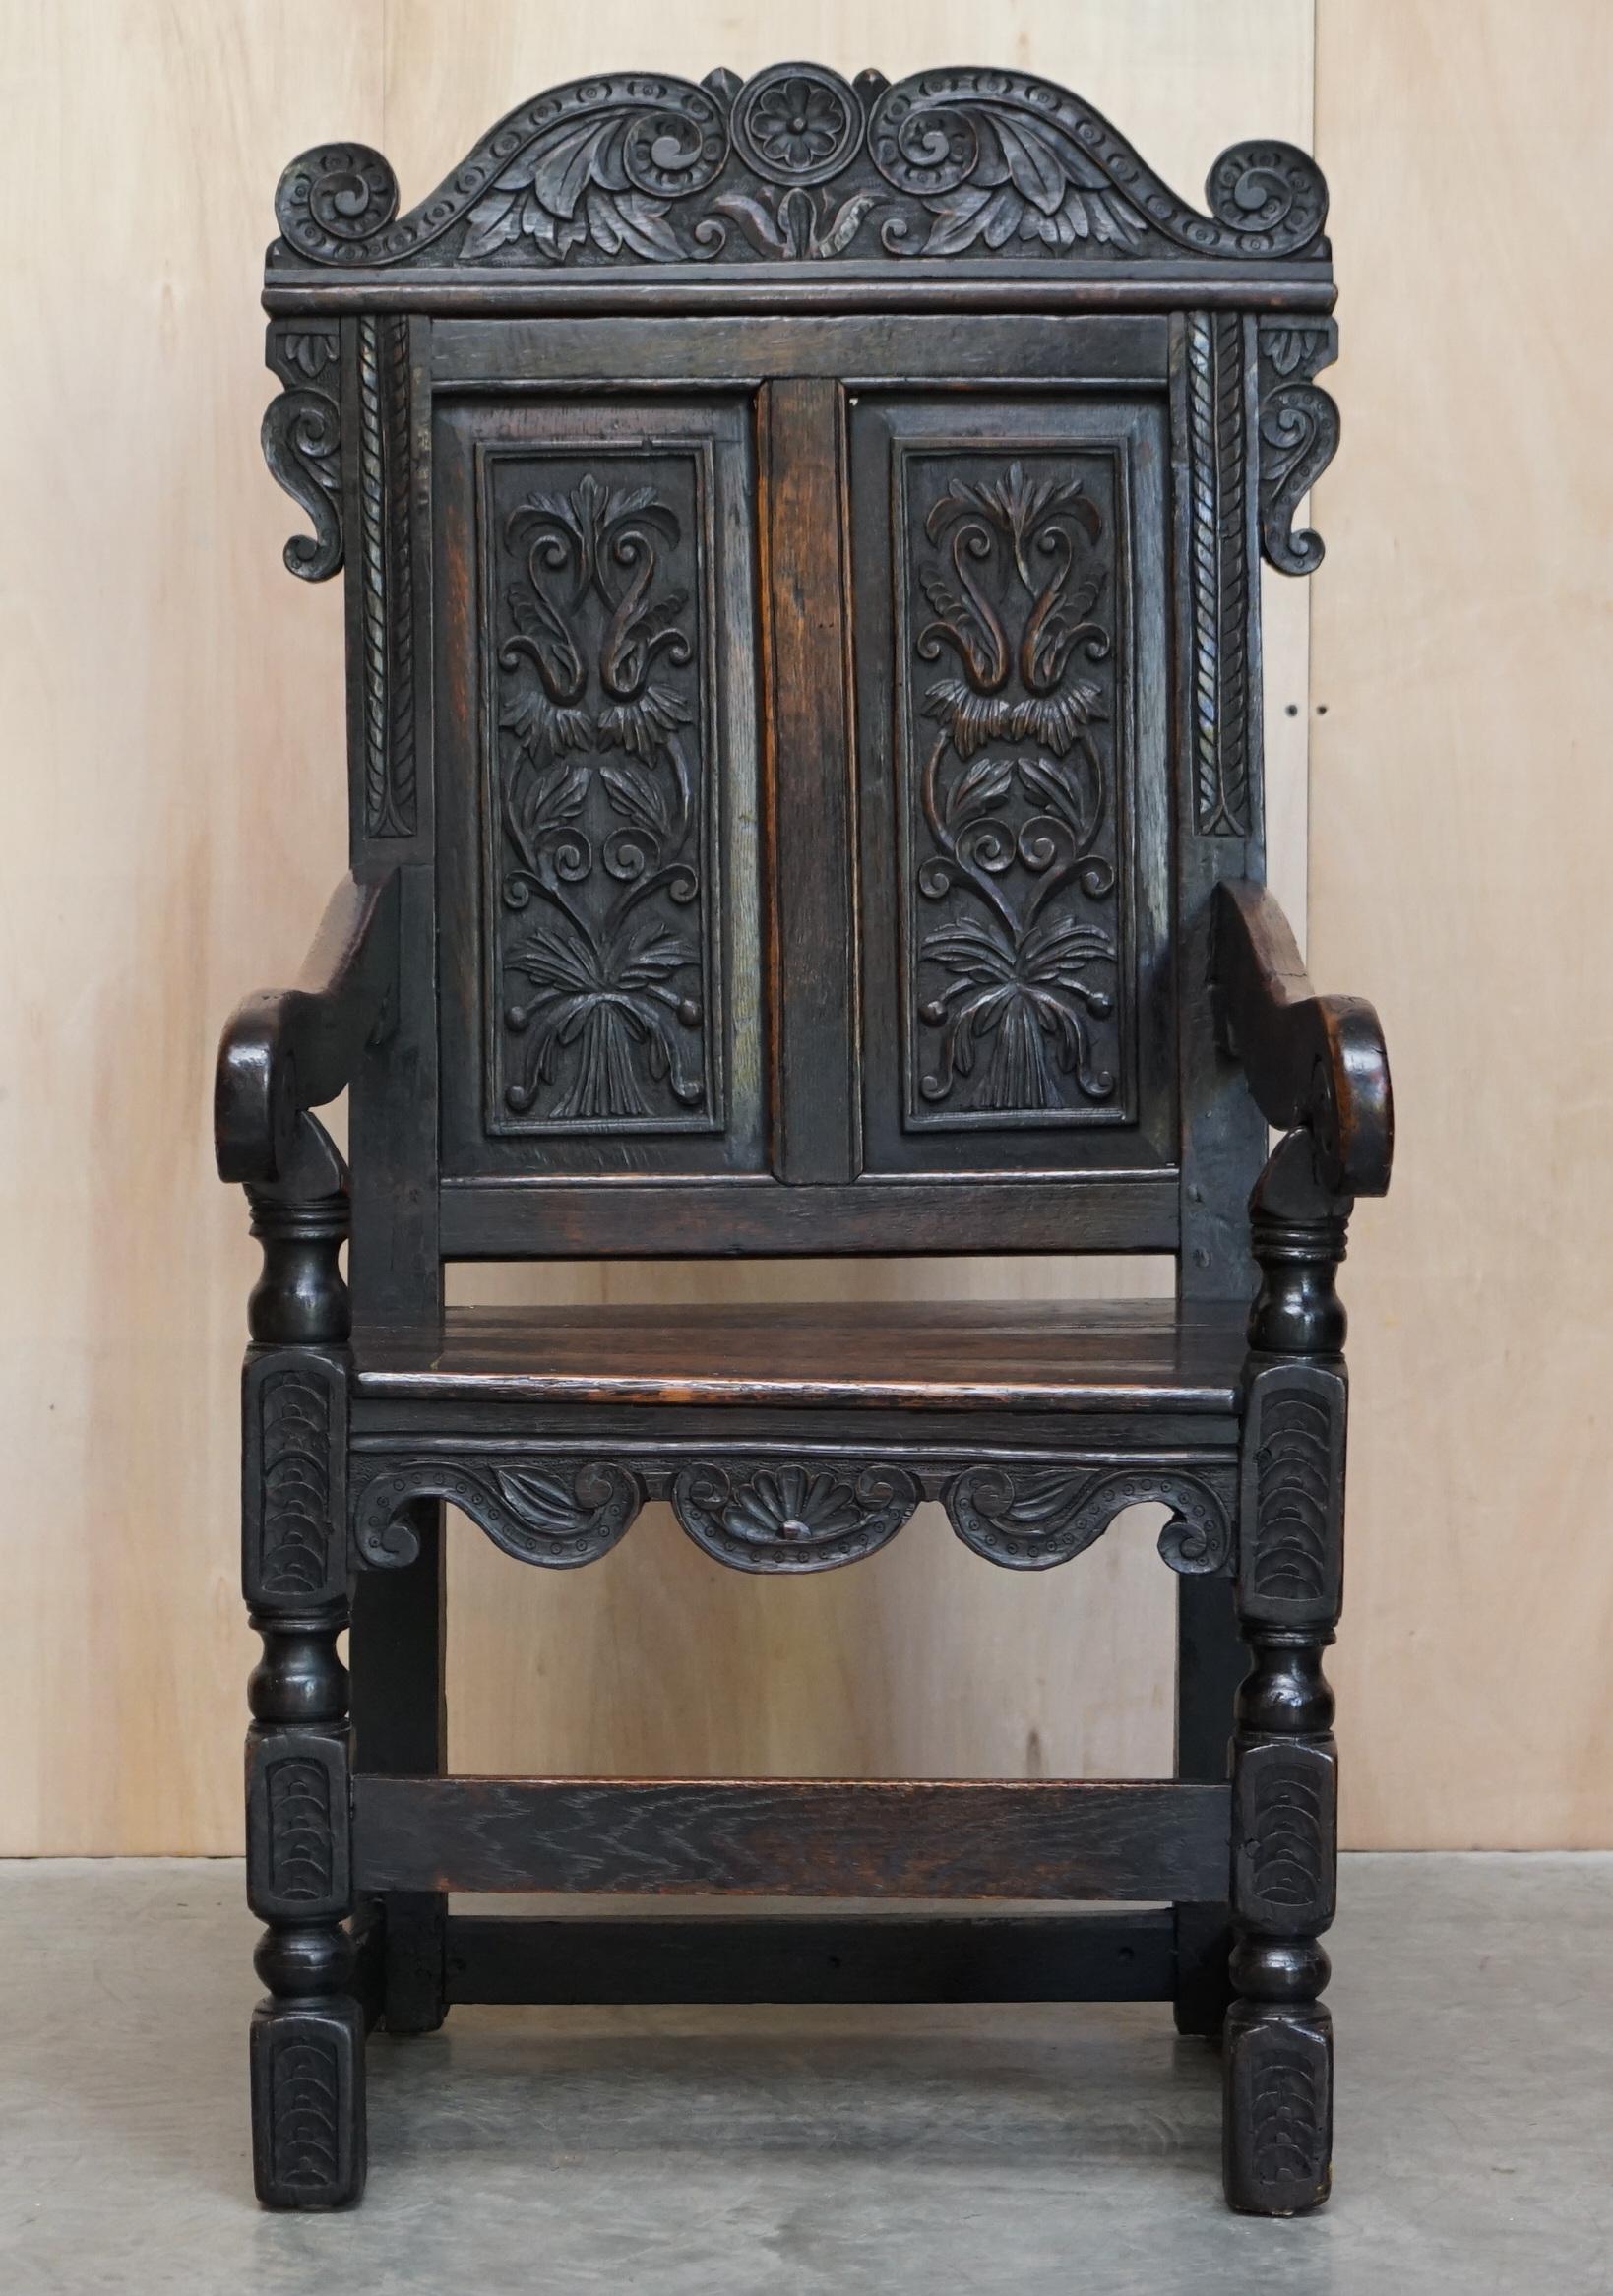 We are delighted to offer for sale this rare original 18th century Northern English hand carved from solid oak Wainscot armchair circa 1720

A highly decorative and original piece with turned finials above a moulded and carved back panel, the down